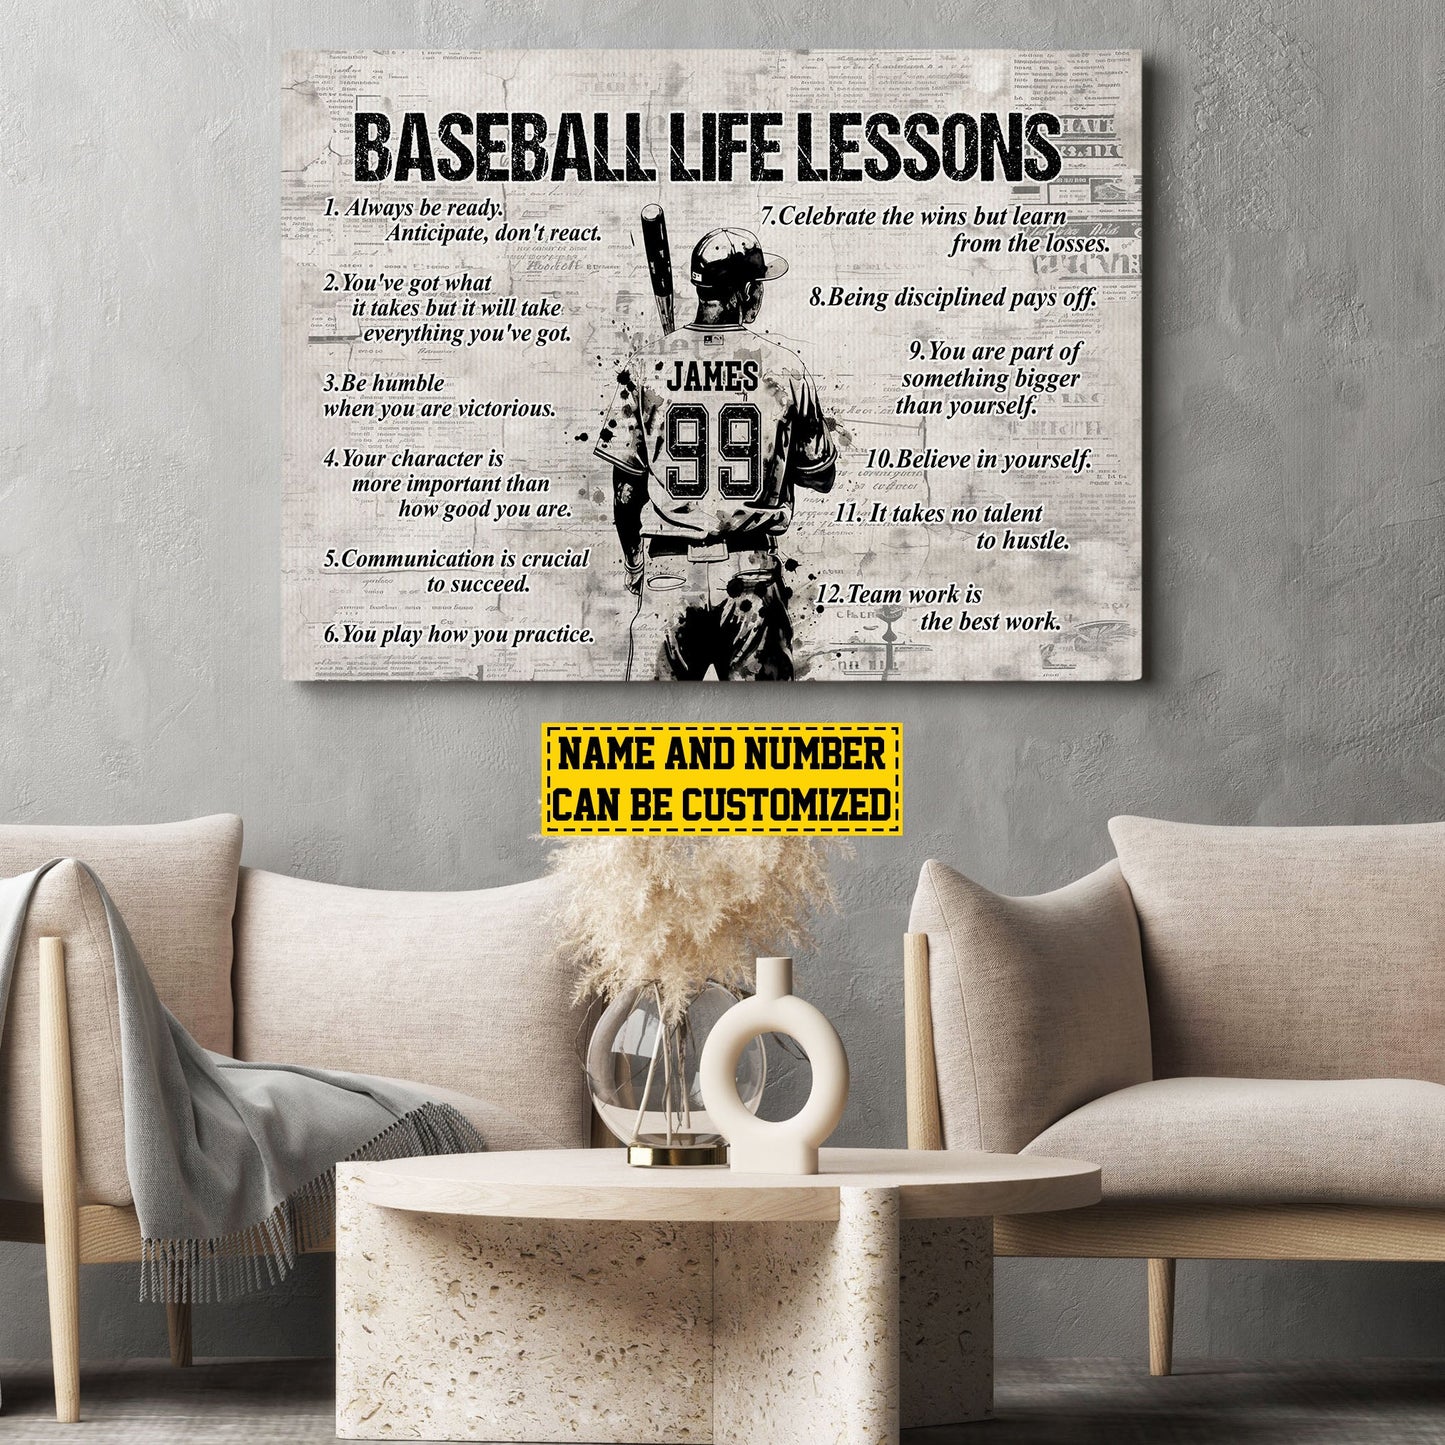 Baseball Life Lessons, Personalized Motivational Baseball Canvas Painting, Inspirational Quotes Wall Art Decor, Poster Gift For Baseball Lovers